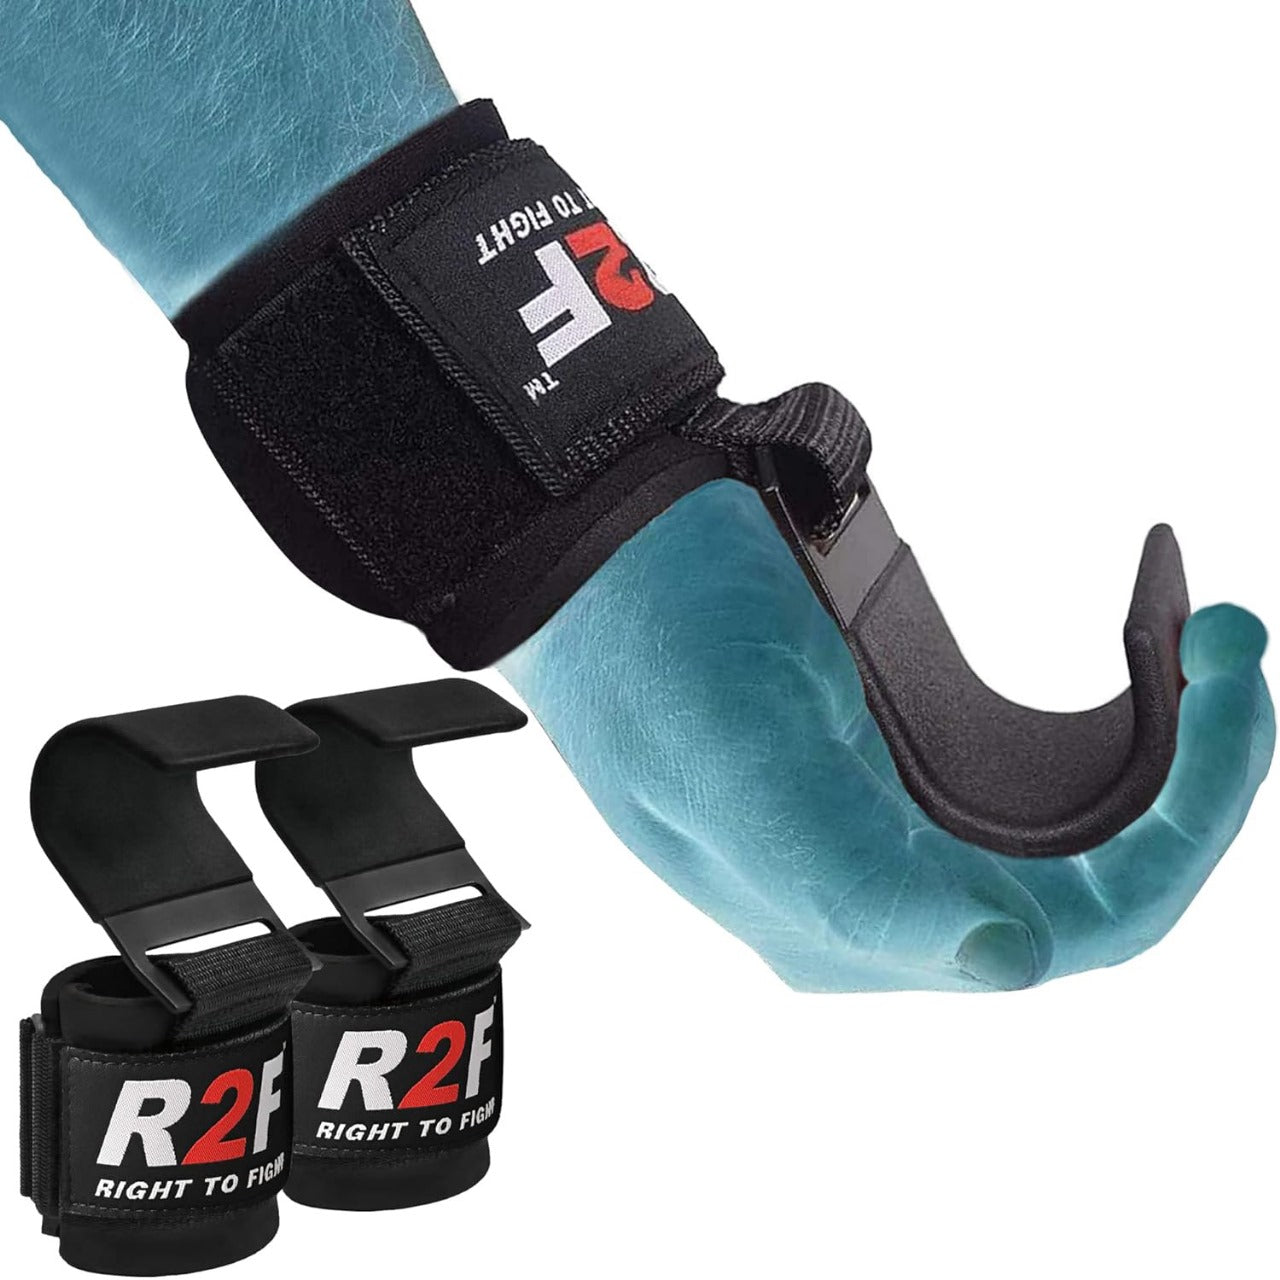 R2F Weight Lifting Hooks, Non-Slip Rubber Coated Grips, 8mm Neoprene Wrist Support Padding, Powerlifting Barbell Rows Deadlifts Chin Pull Up Fitness Strength Training Straps, Gym Bodybuilding Workout.